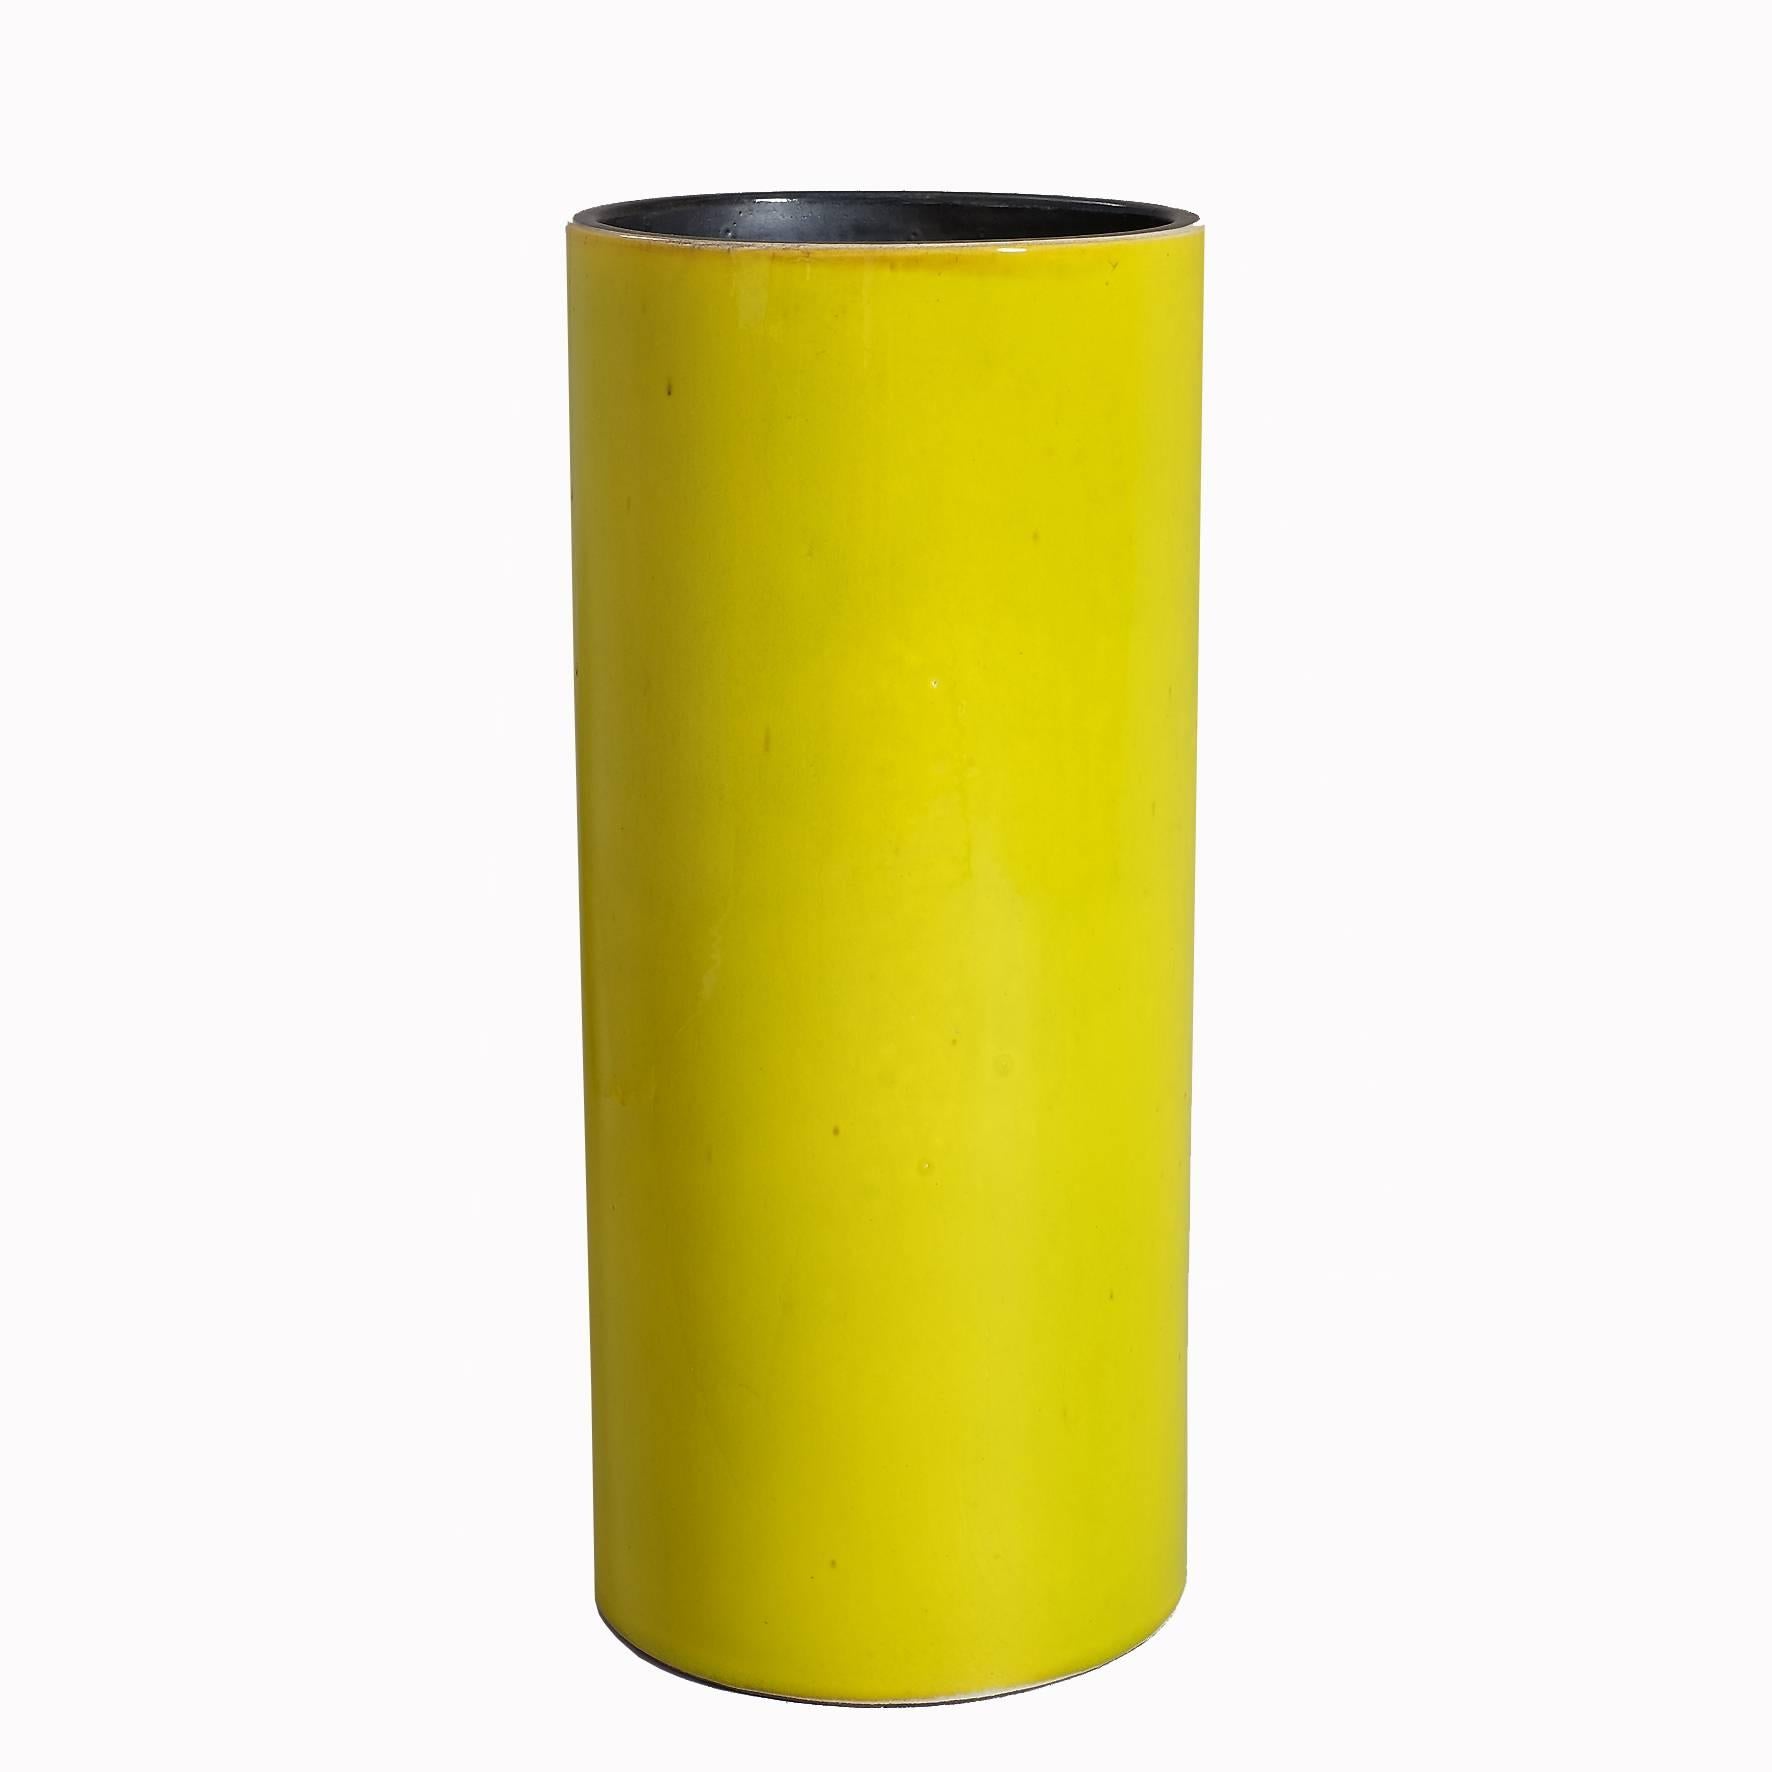 A tall yellow-green glazed ceramic cylindrical vase, with a black covered interior.
Signed underneath 